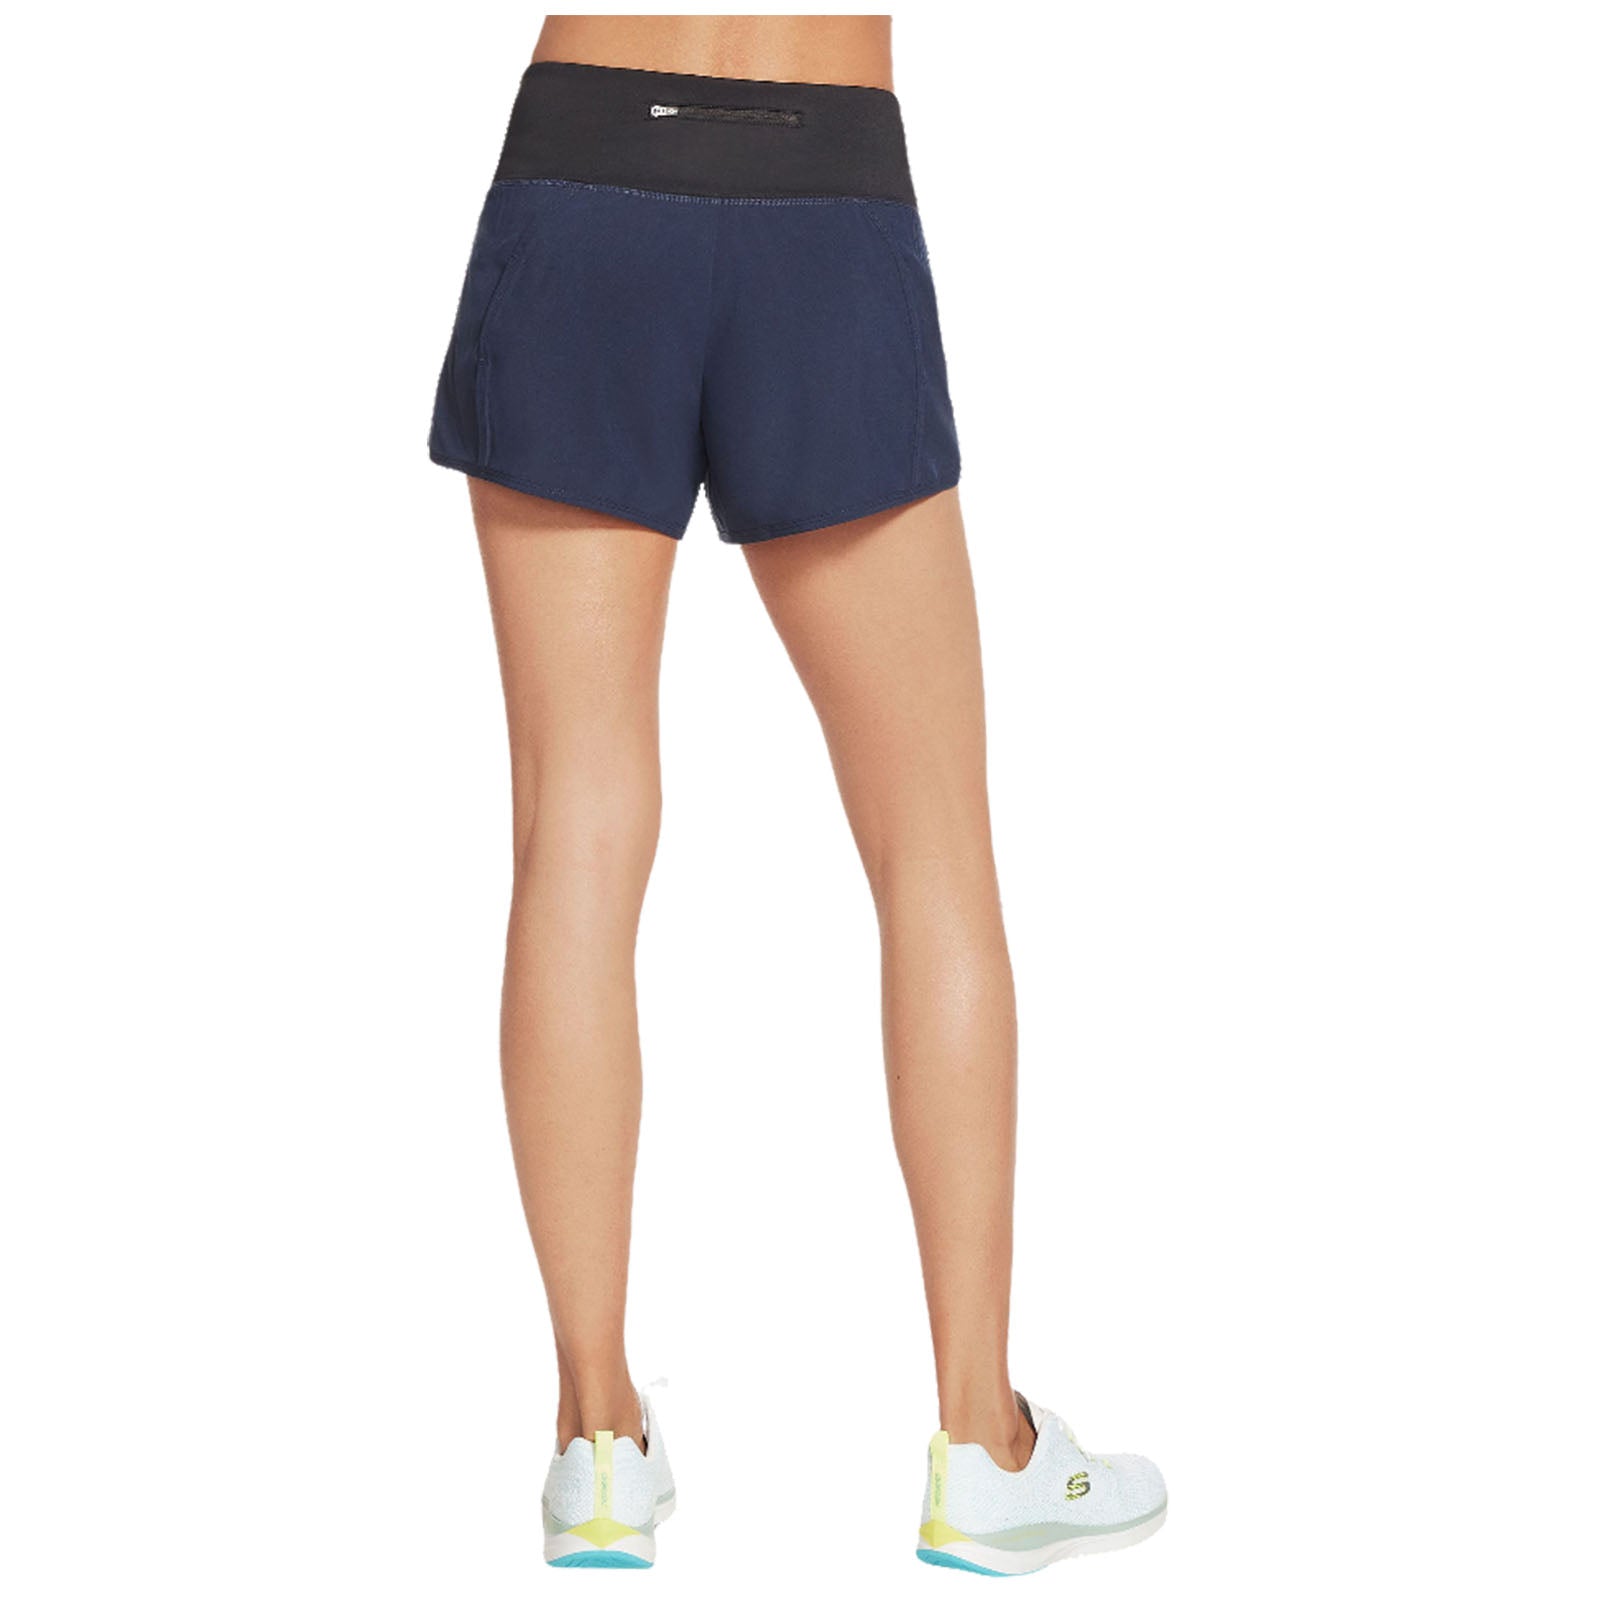 Skechers Ladies Going Places High Waist 4" Shorts